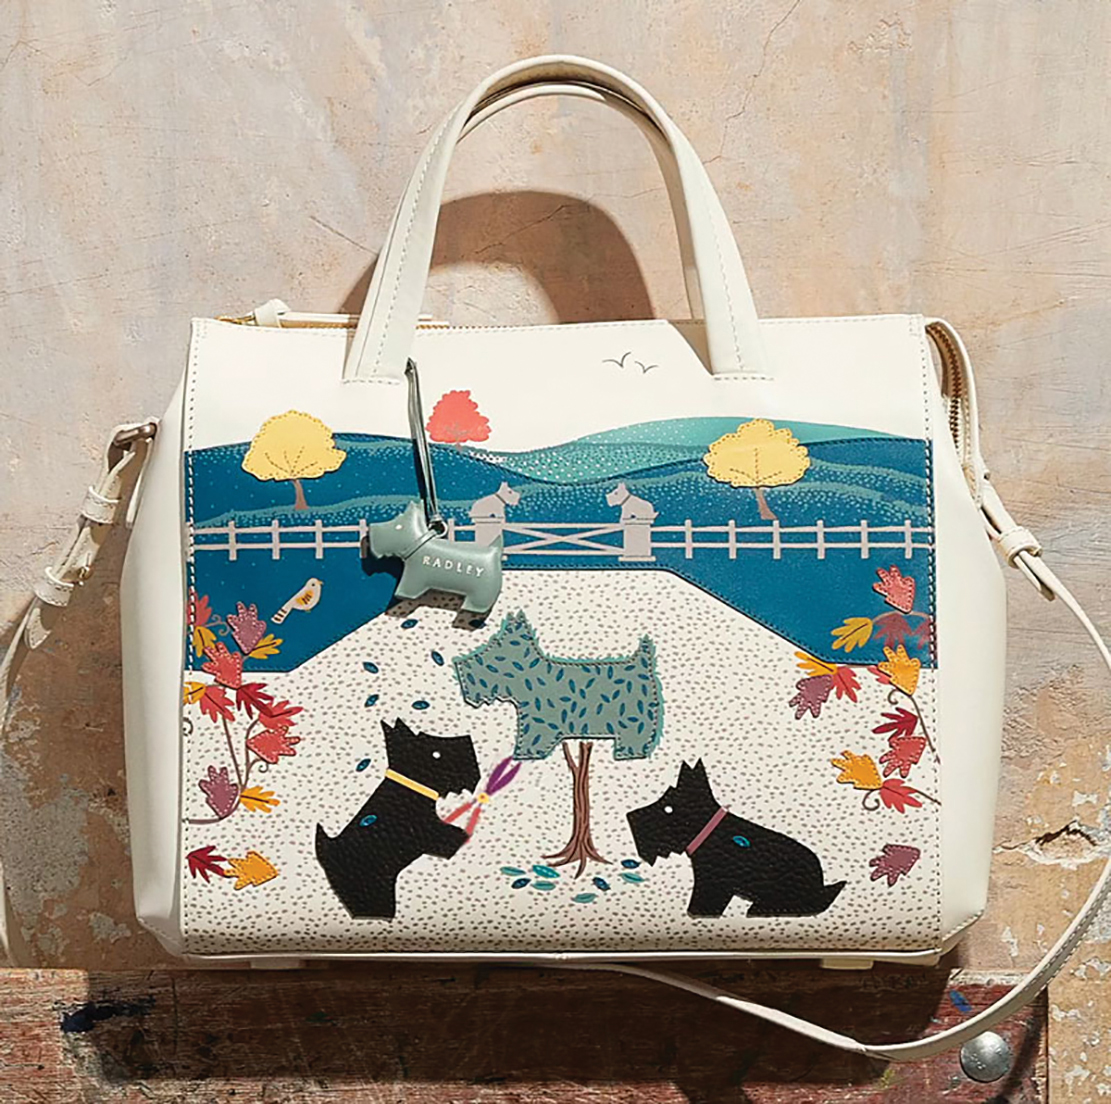 Rachael Saunders designs Radley's latest edition picture bag, Dog of ...